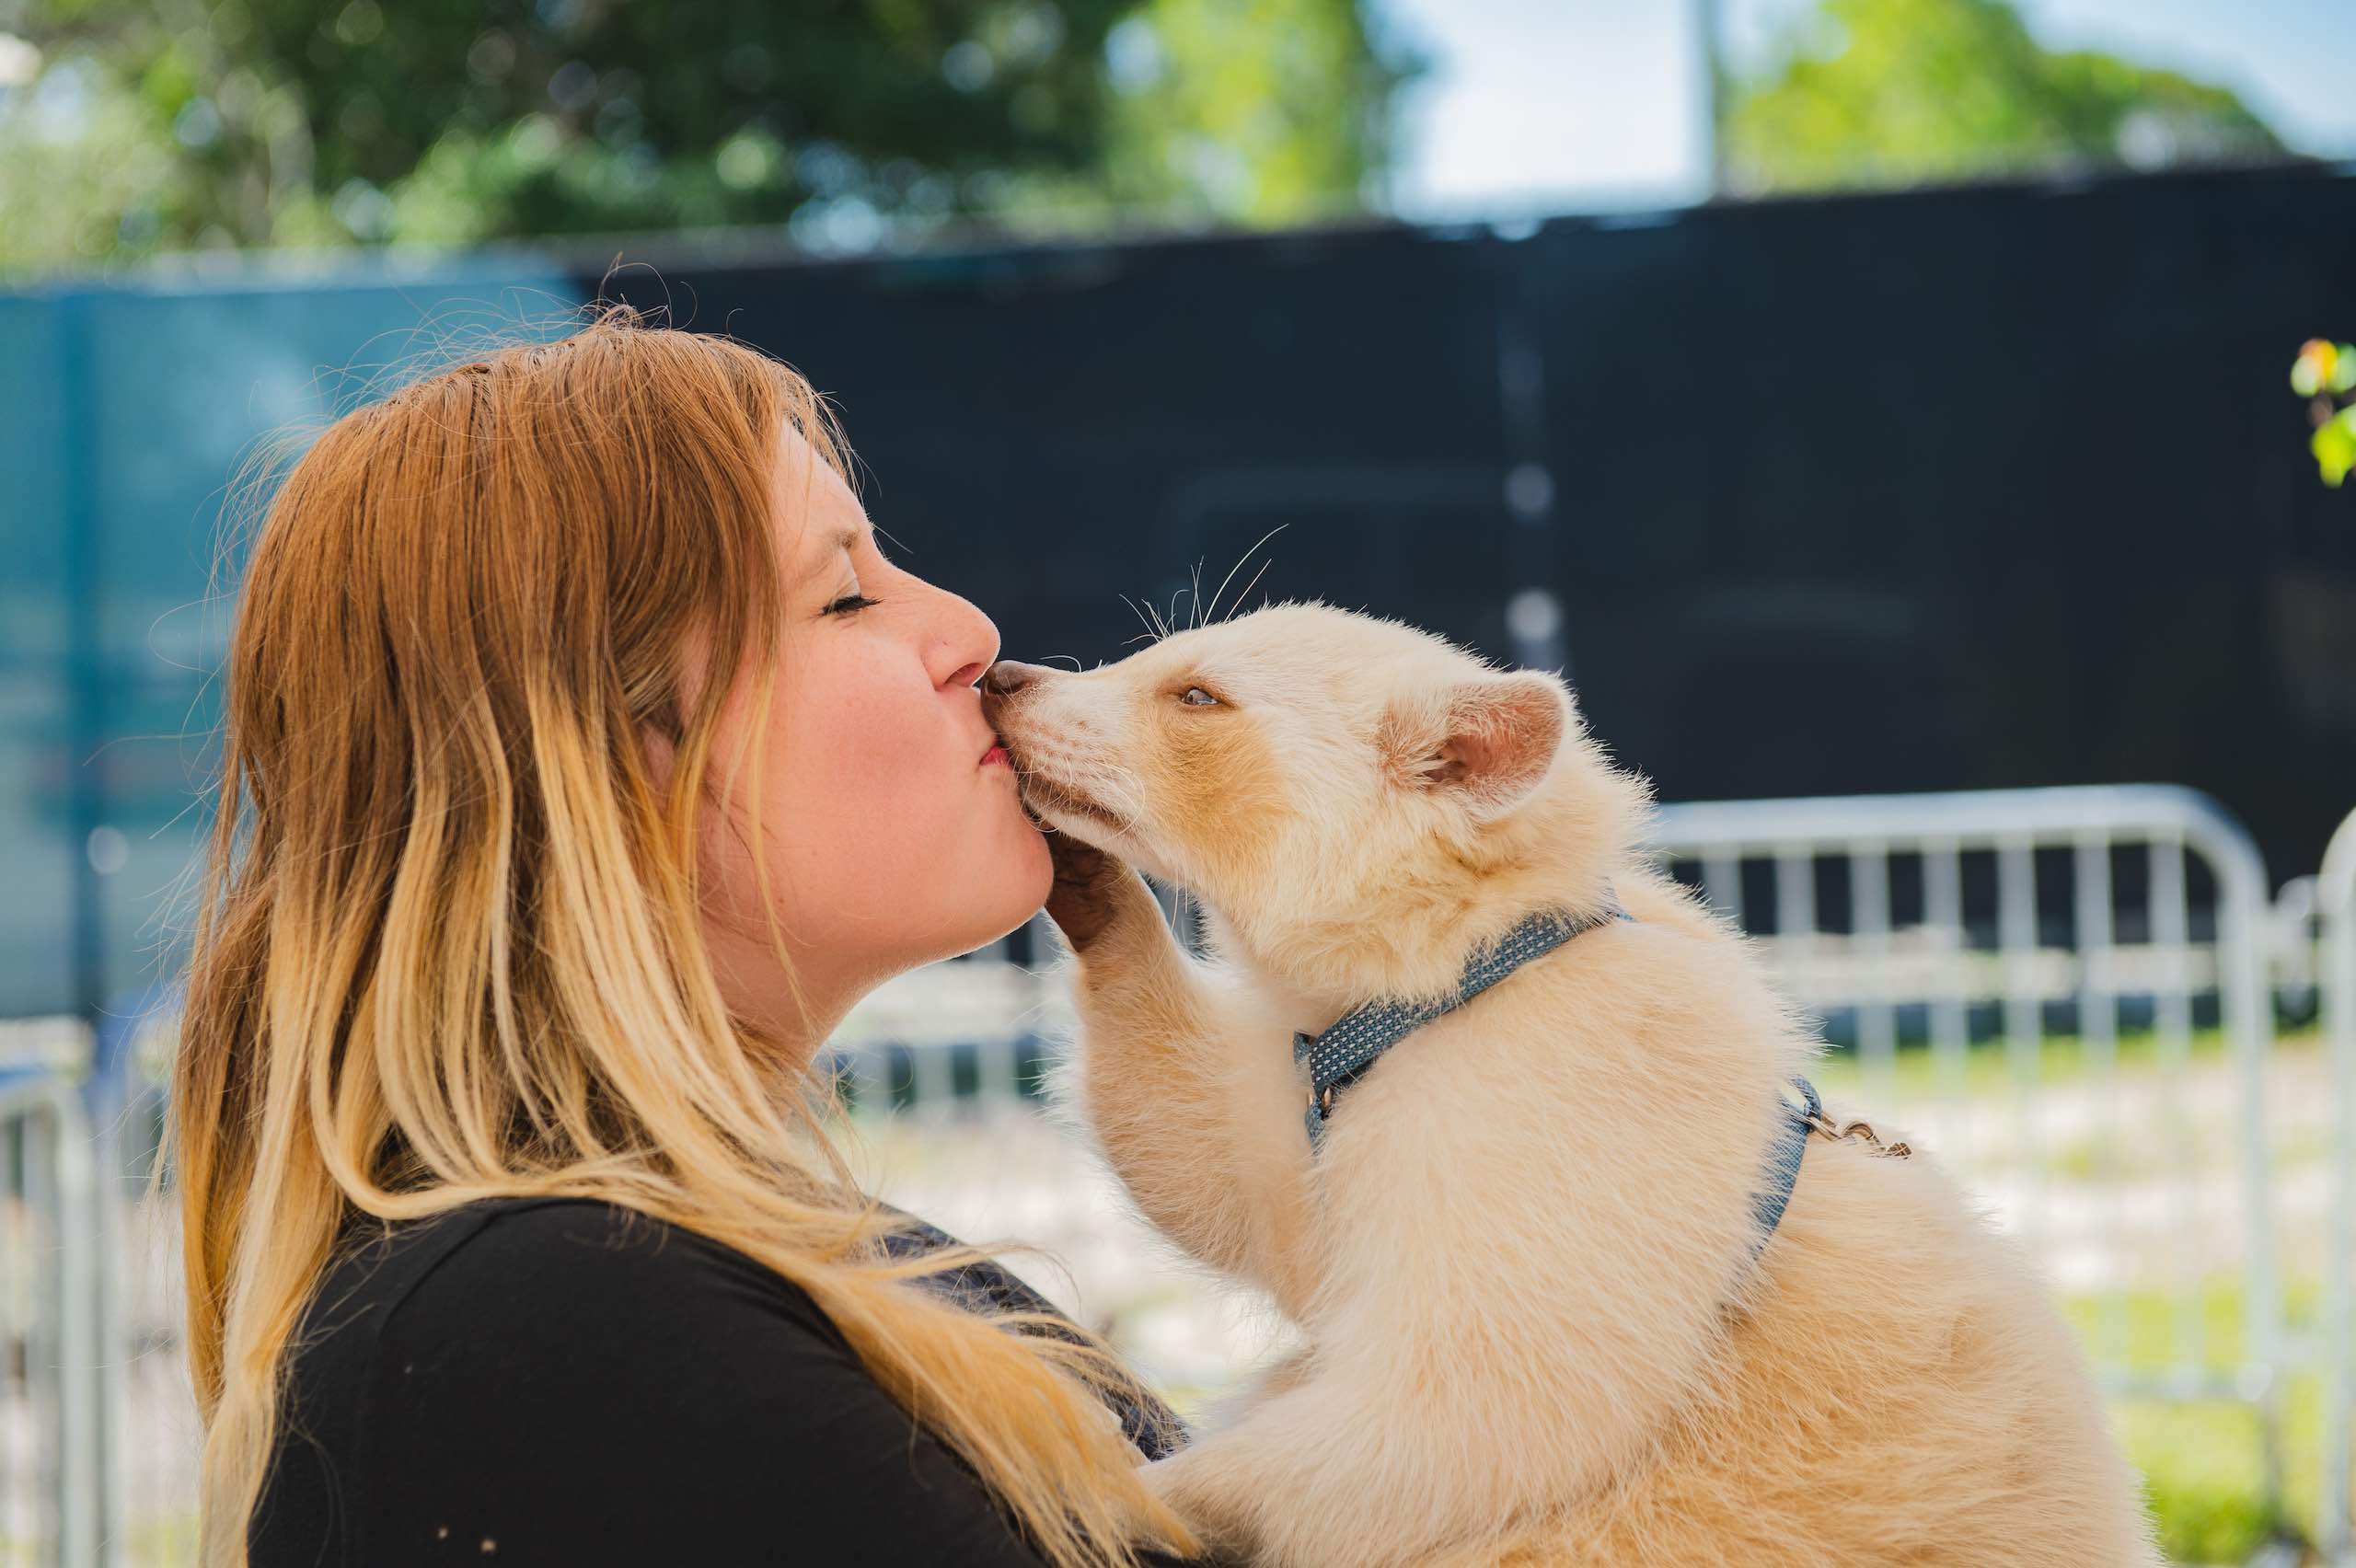 Everglades Holiday Park Side profile closeup of woman with long blond hair kissing a white raccoon wearing a blue leash collar